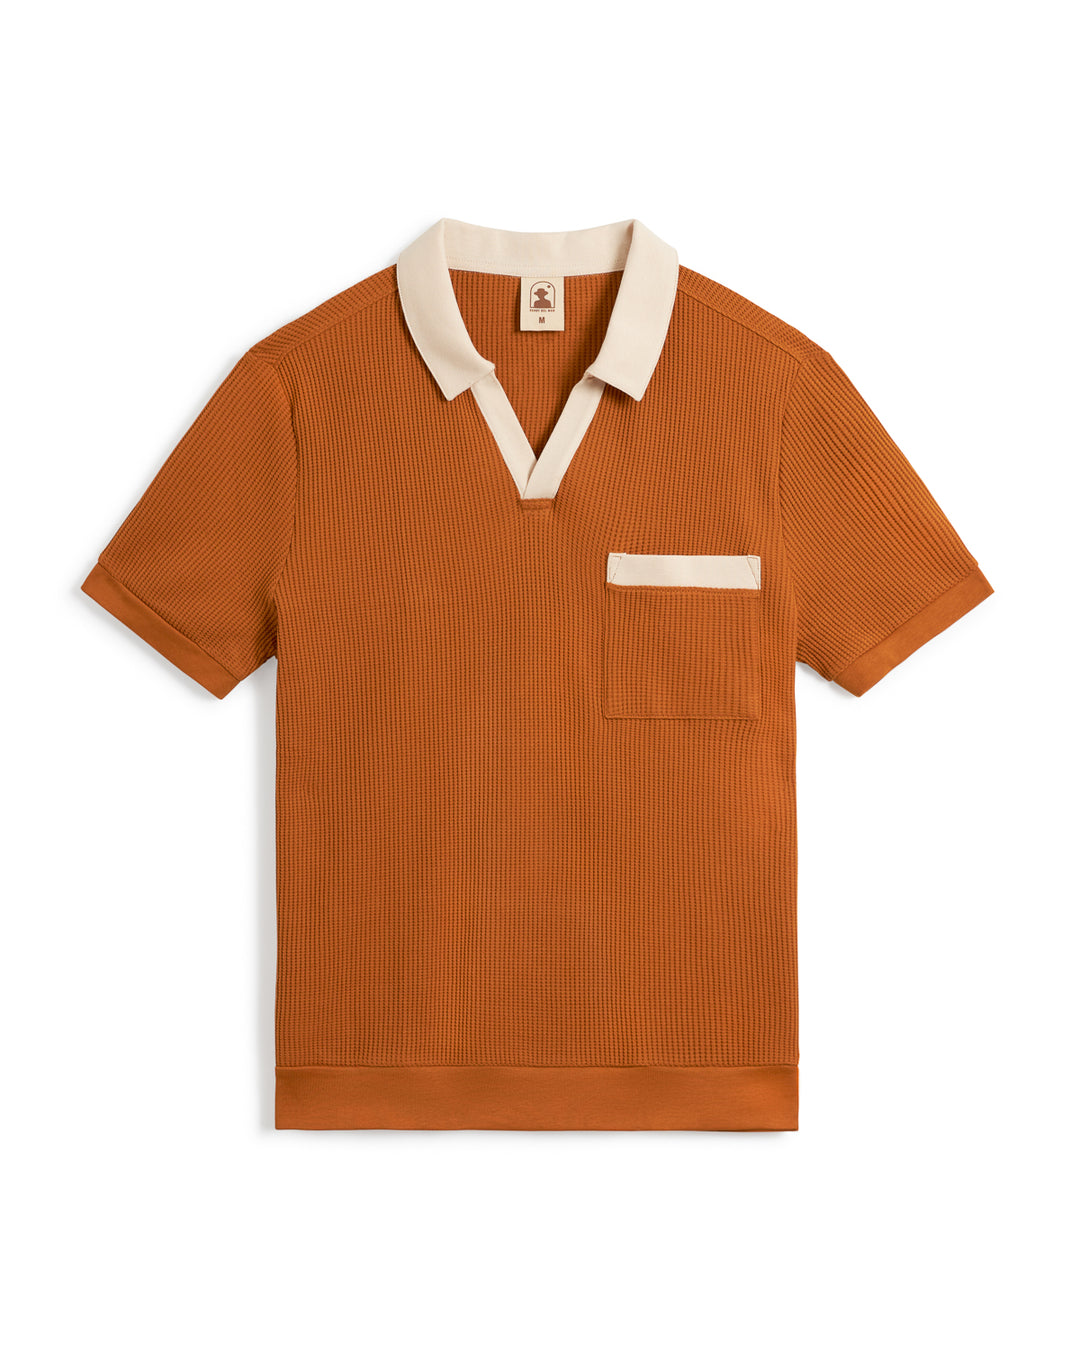 A short-sleeve **The Cannes Waffle Knit Shirt - Burnt Sienna** by **Dandy Del Mar** in burnt orange with a contrasting beige V-neck polo collar and chest pocket trim, crafted from waffle knit fabric.